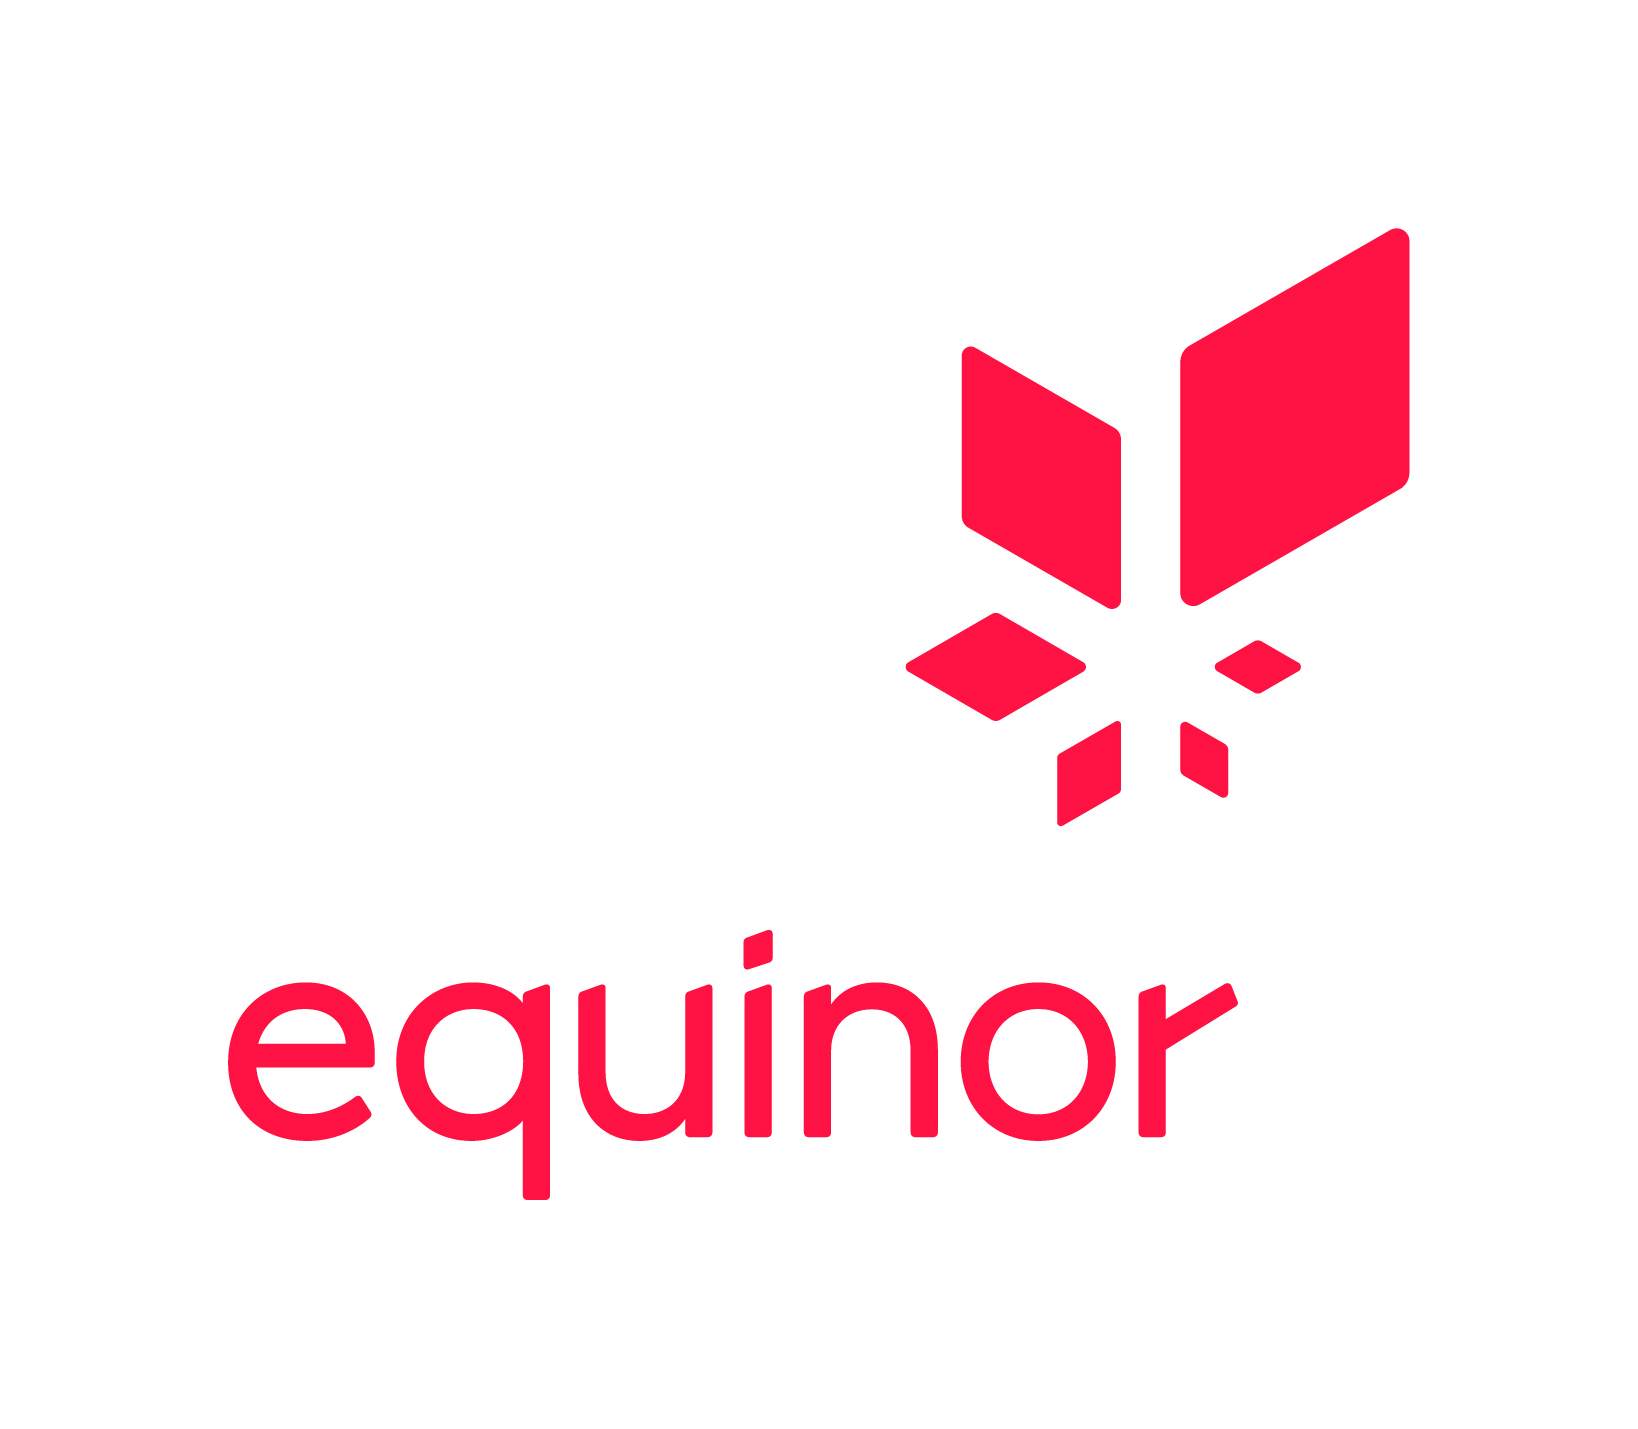 https://cimple.no/wp-content/uploads/2020/10/Equinor_PRIMARY_logo_RGB_RED.jpg